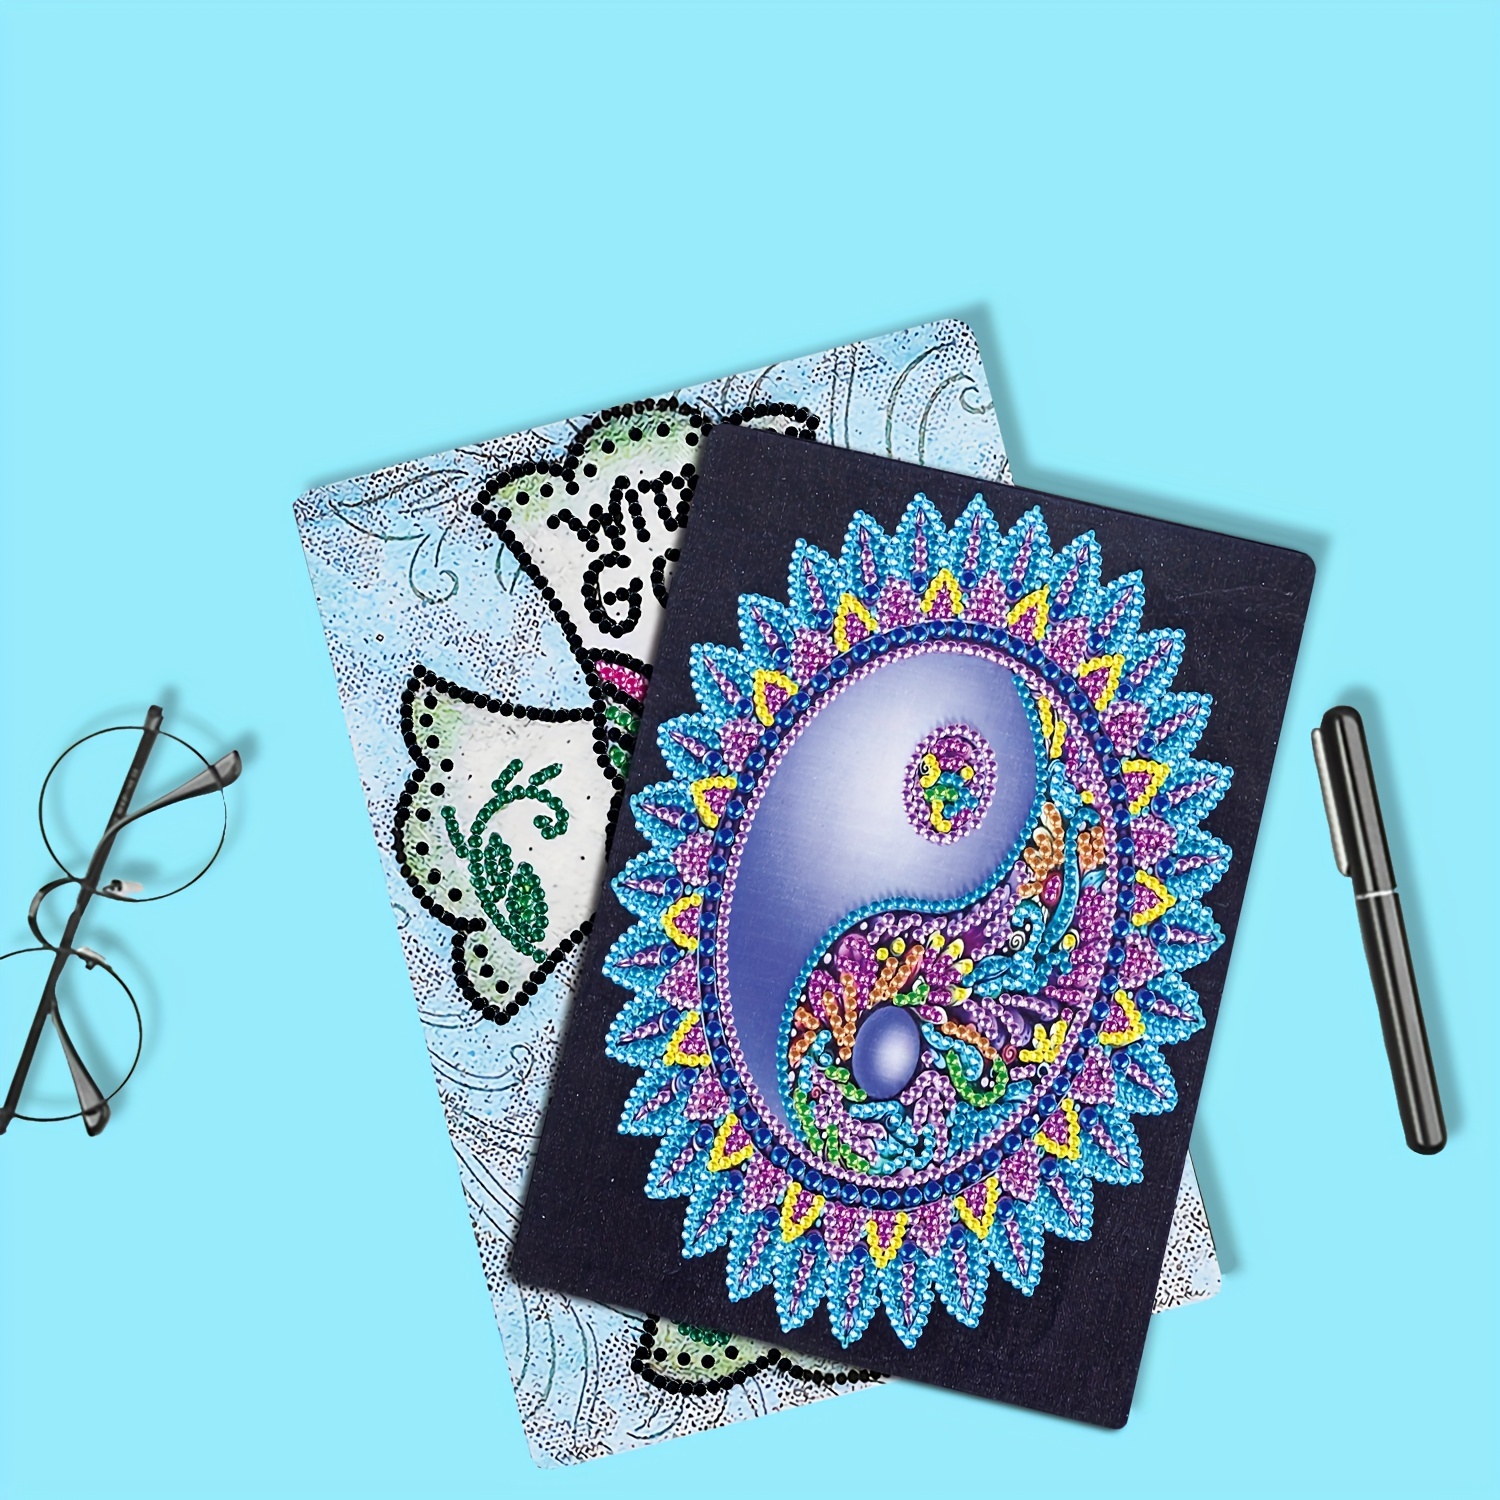 Diamond Painting Journal - Notebook for 50 Diamond Painting Projects - DAC  Version: special for Diamond Art Club projects